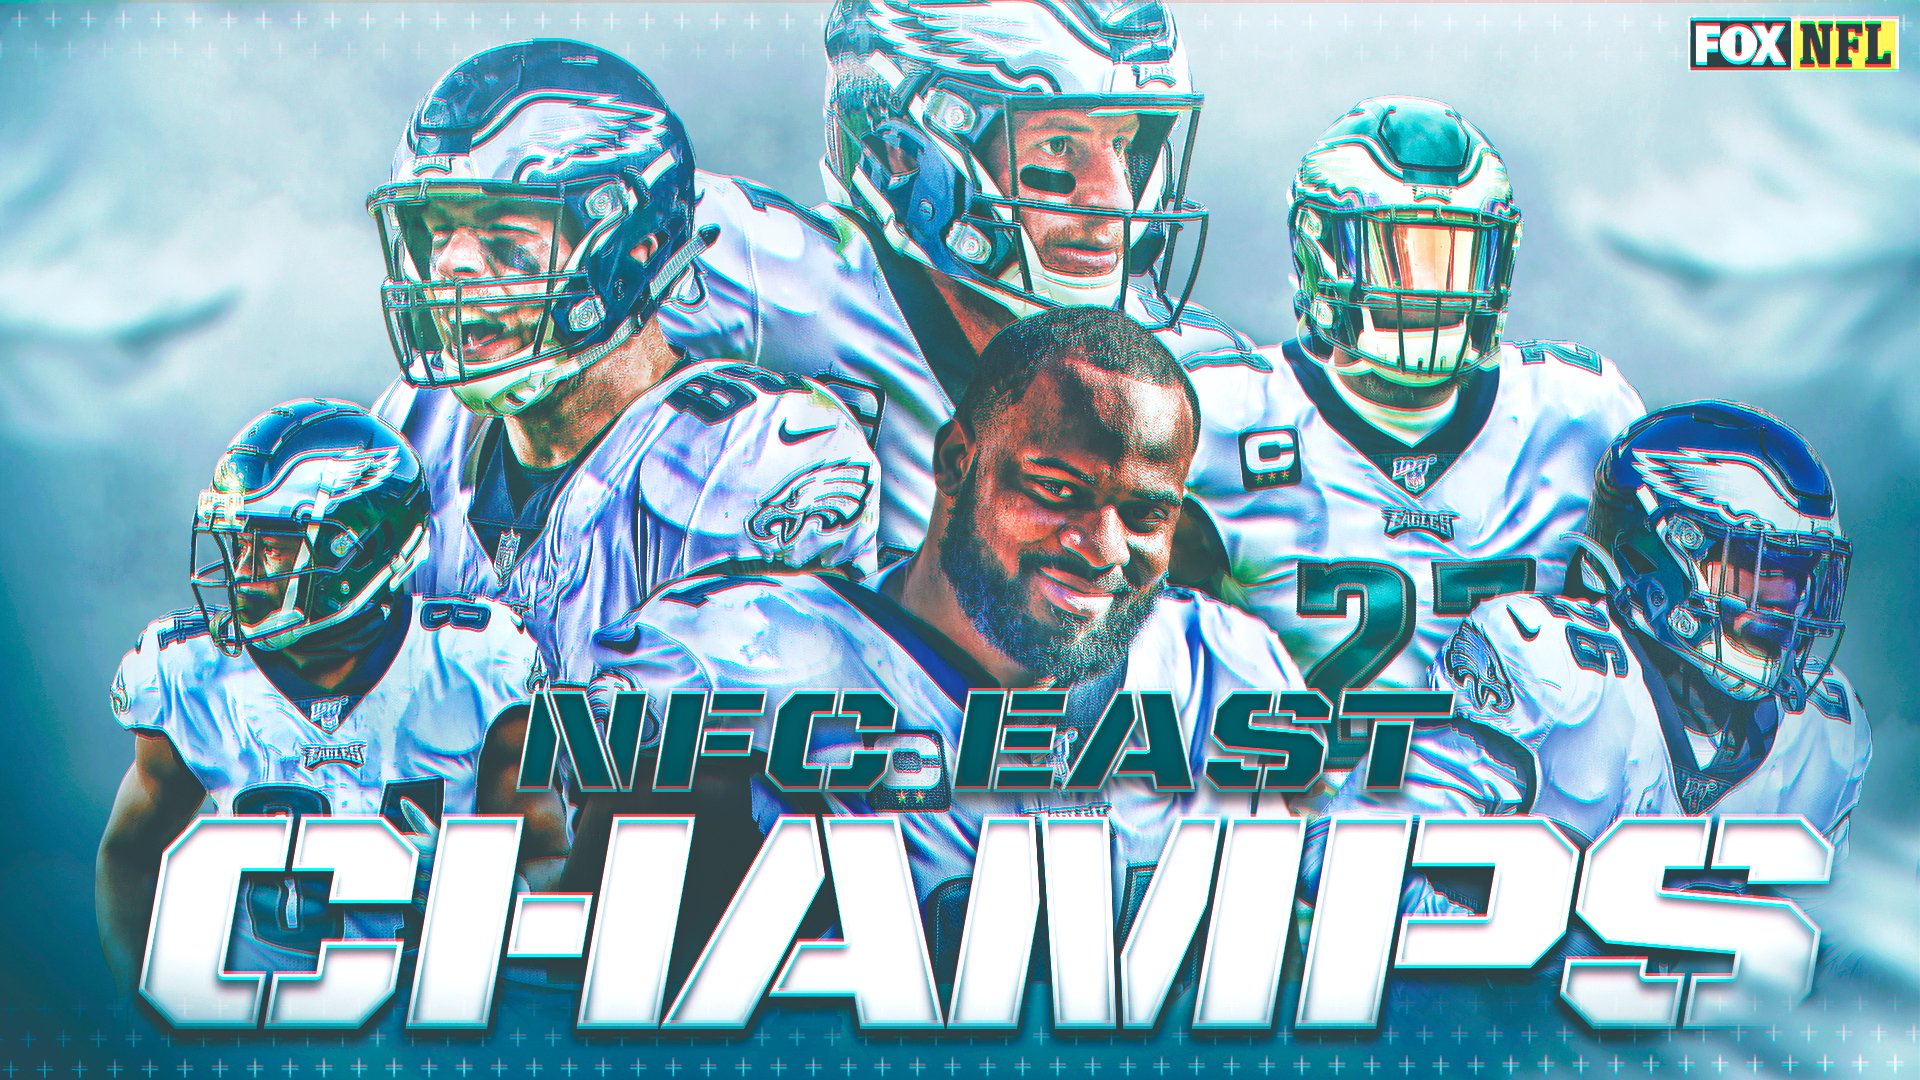 FOX Sports: NFL on X: '#FlyEaglesFly The @Eagles are NFC East